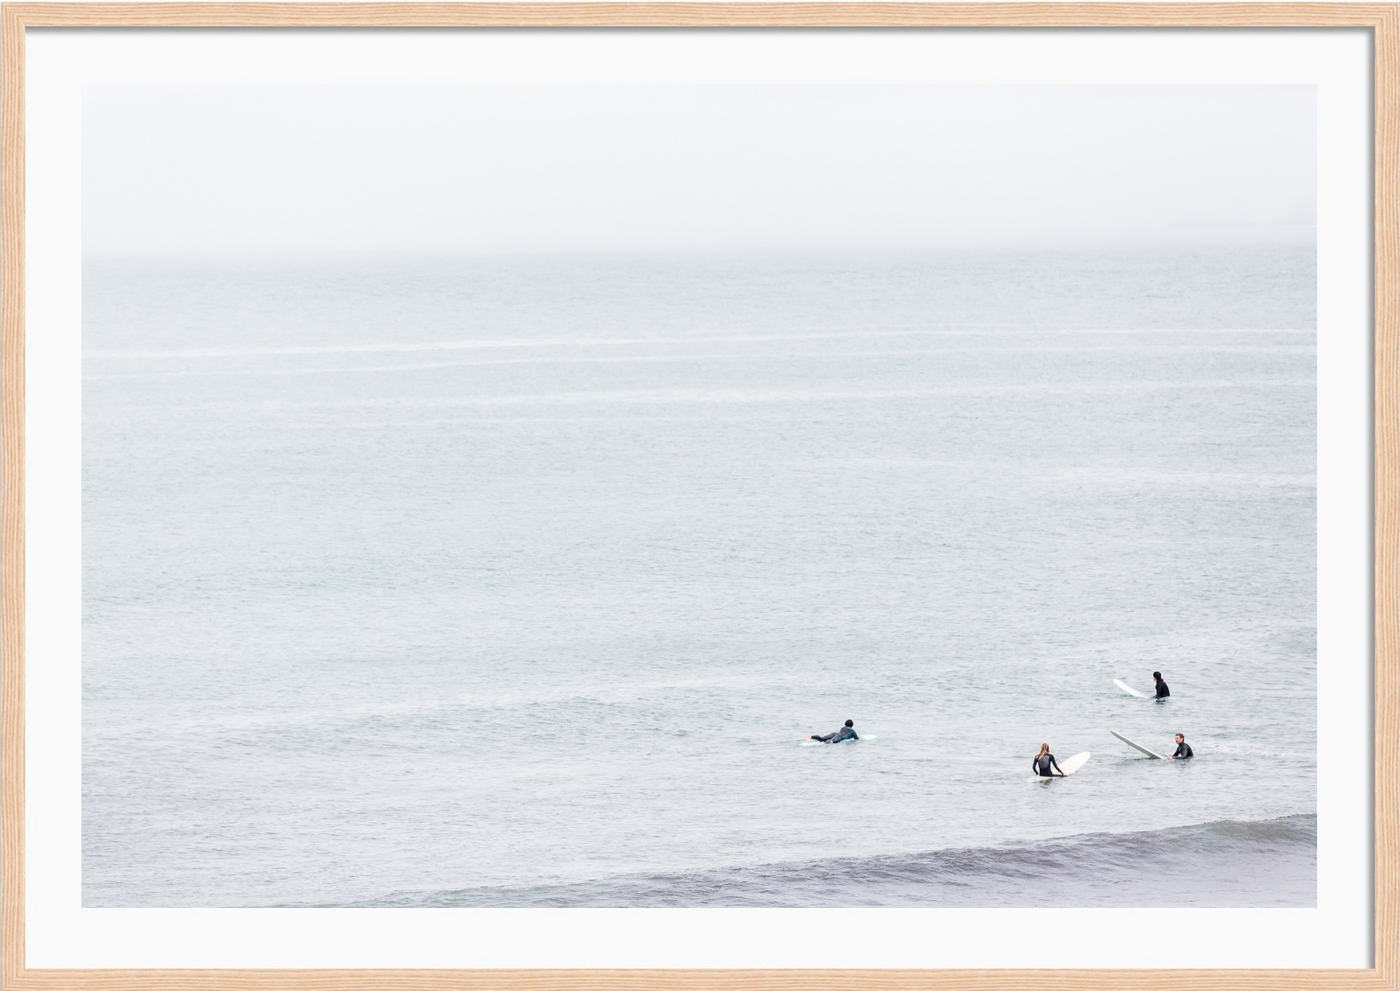 Pacifica Surfers Waiting For a Wave